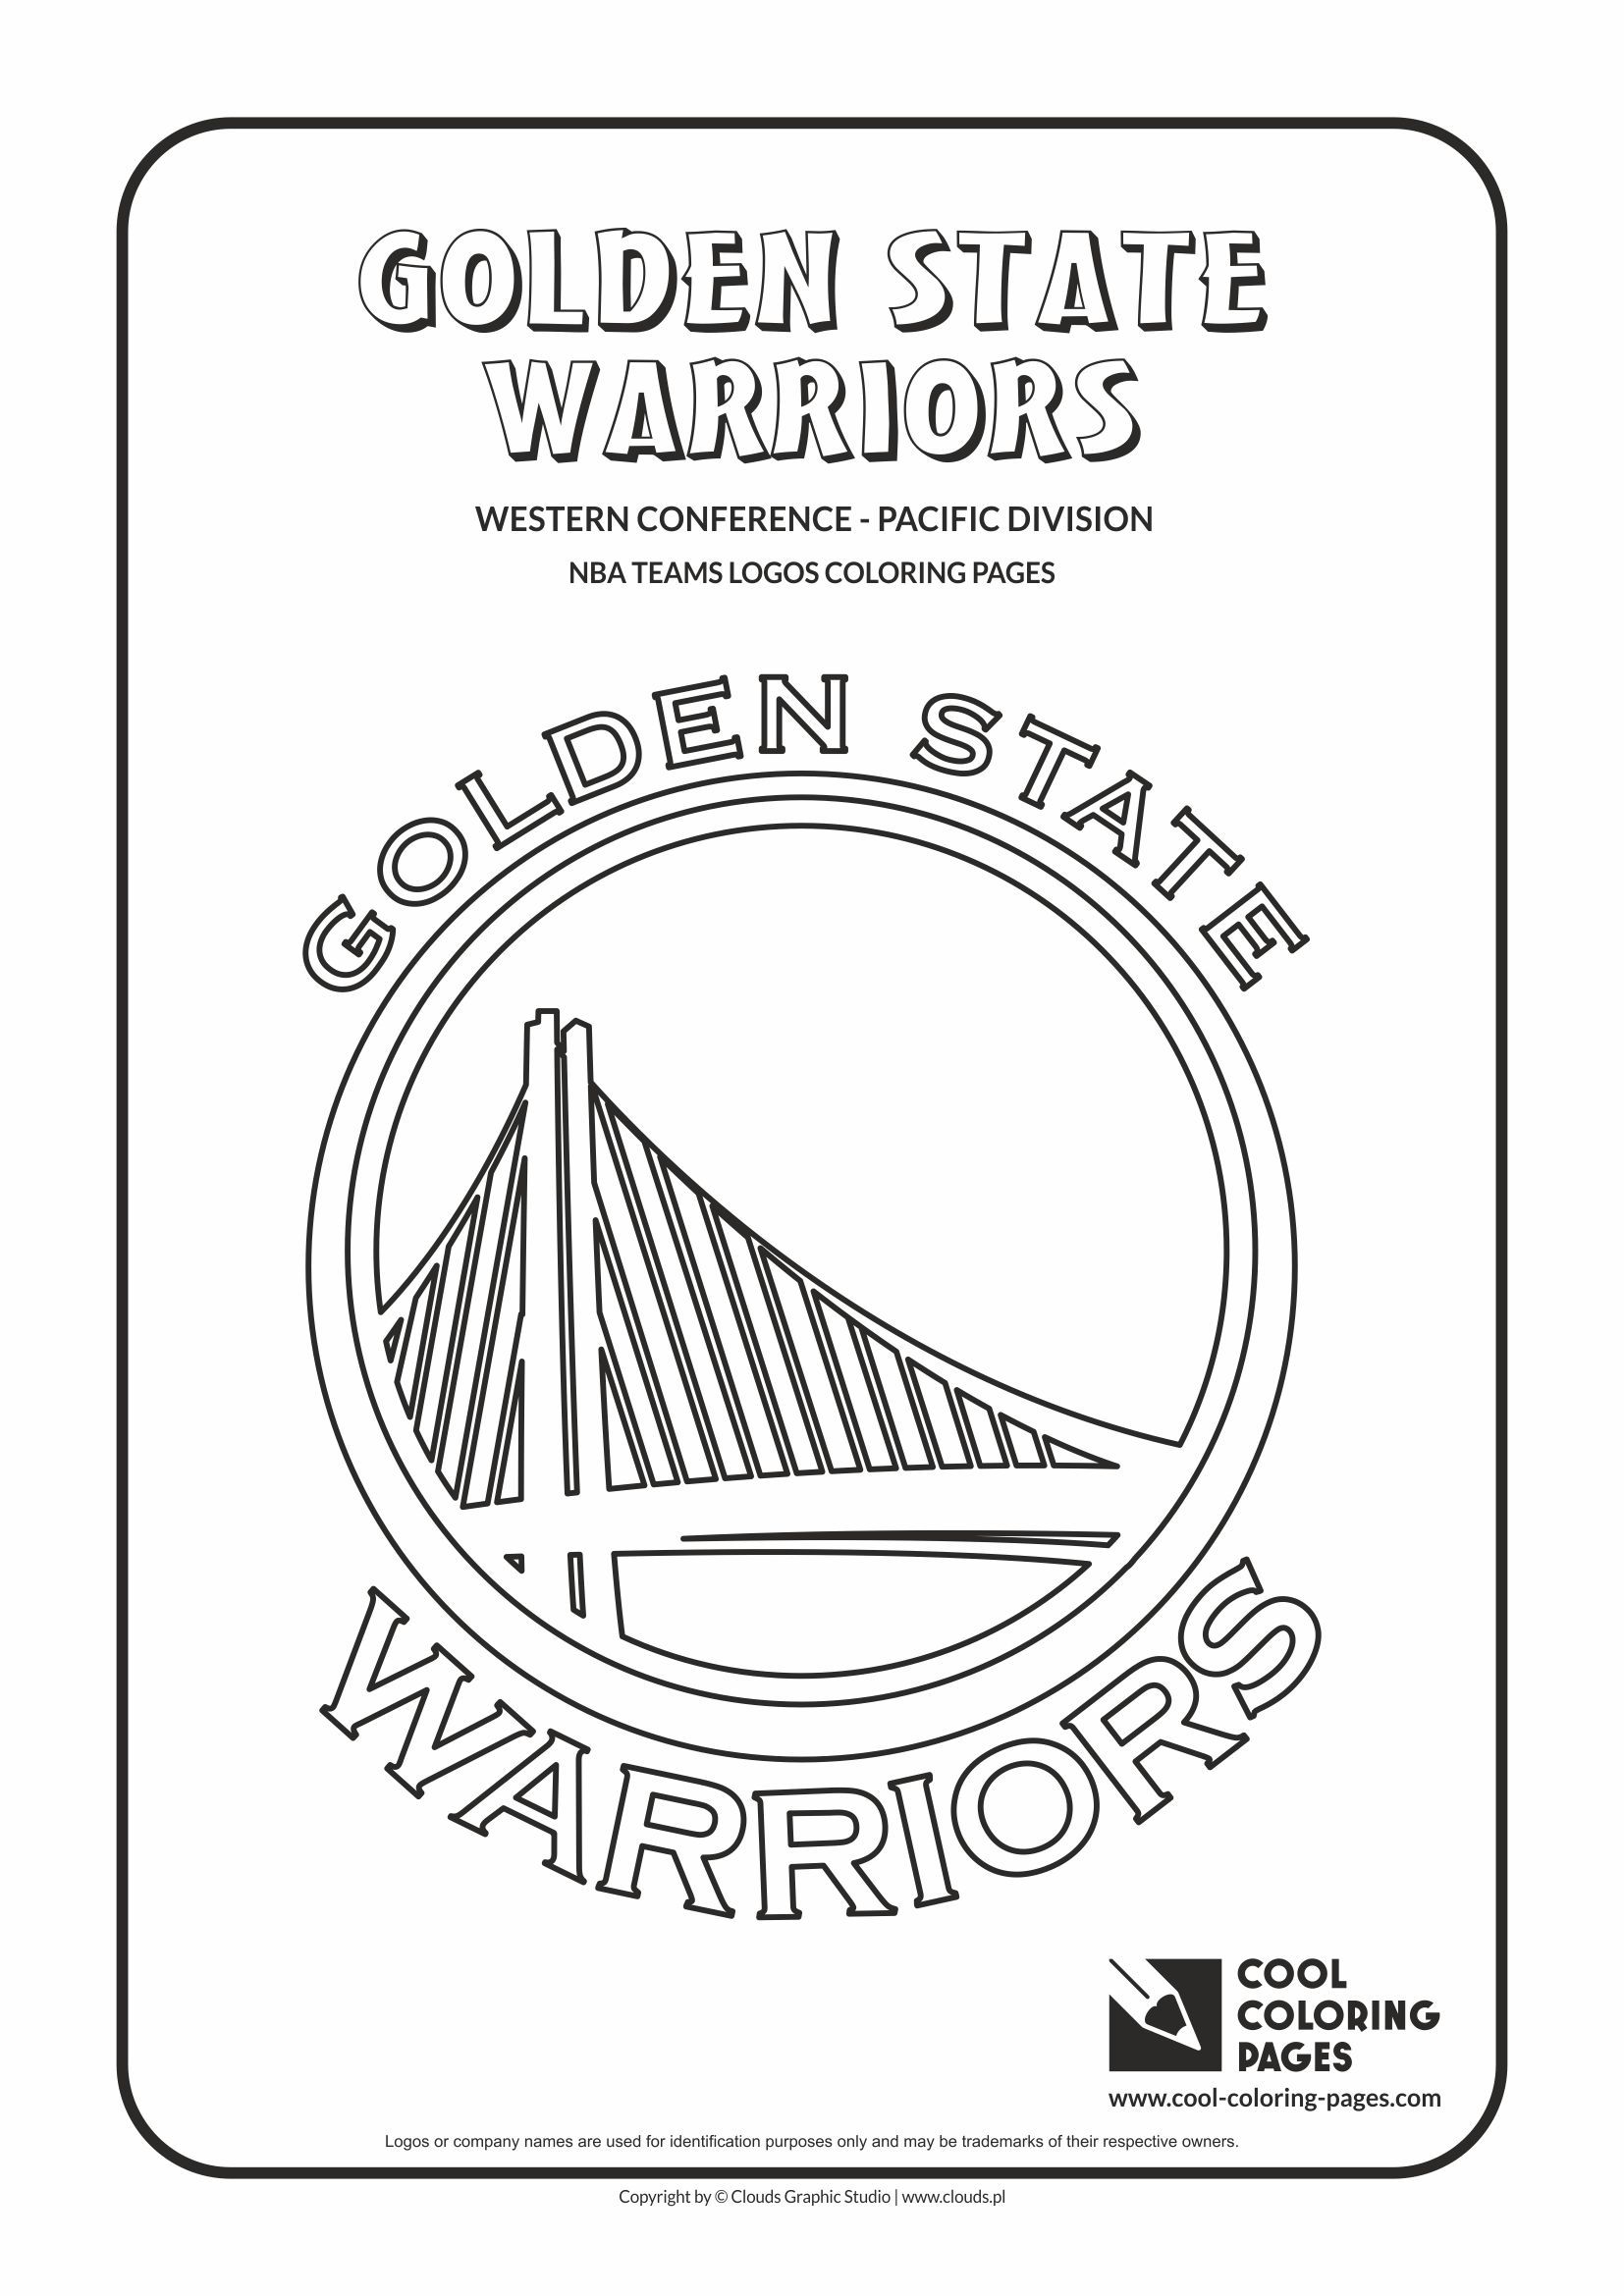 Cool coloring pages